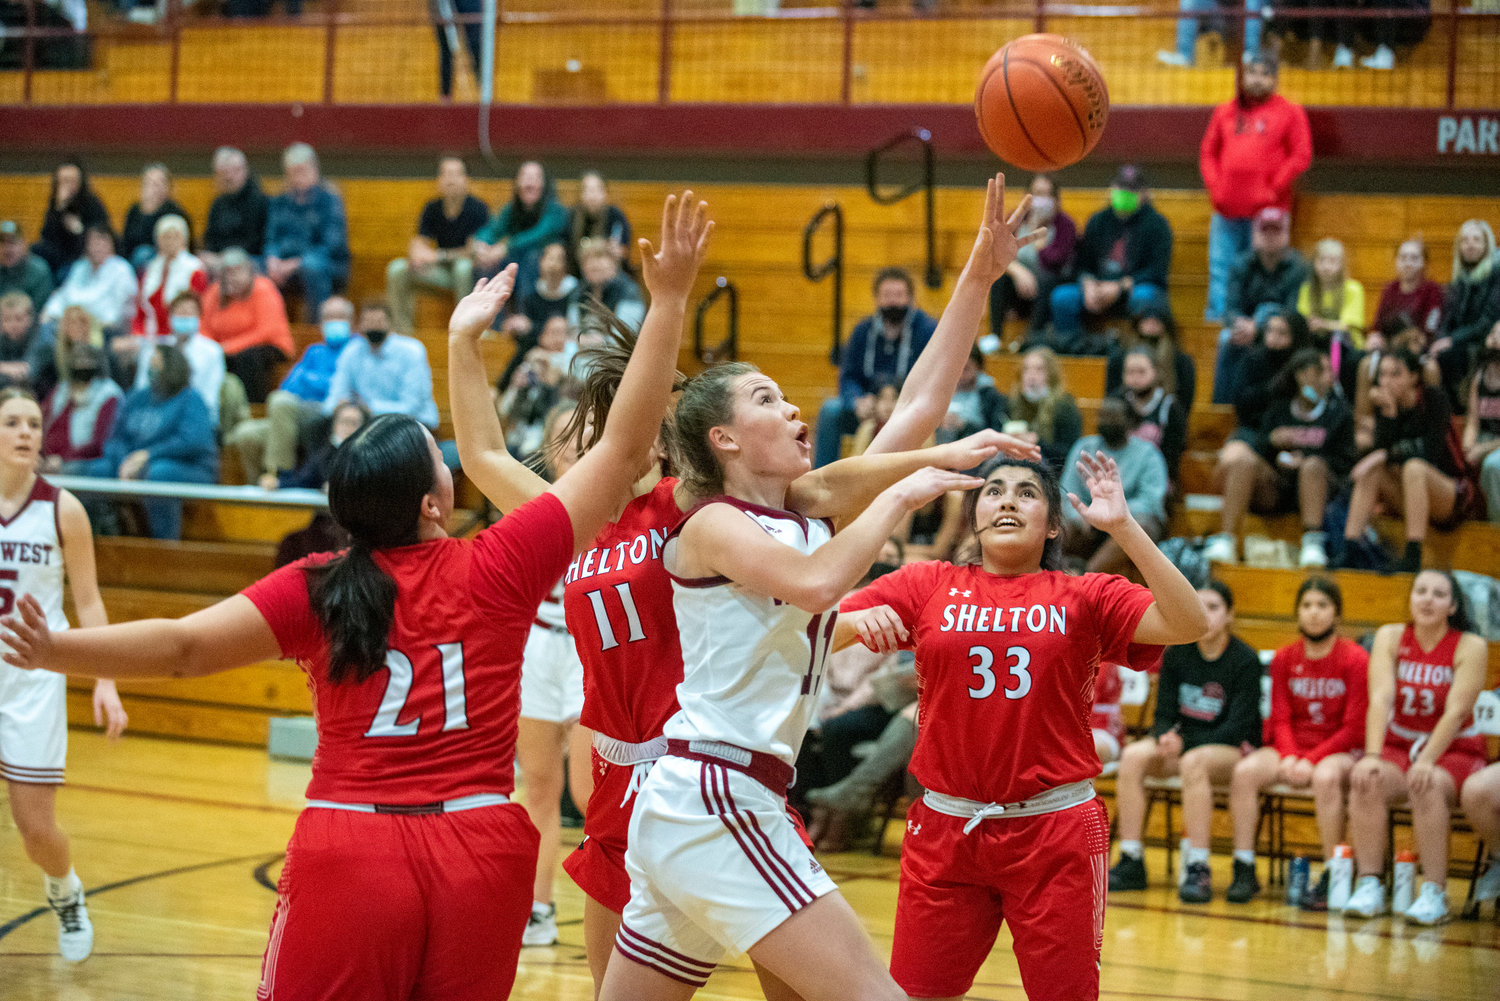 W.F. West's Olivia Remund (11) drives to the bucket against Shelton on Dec. 7